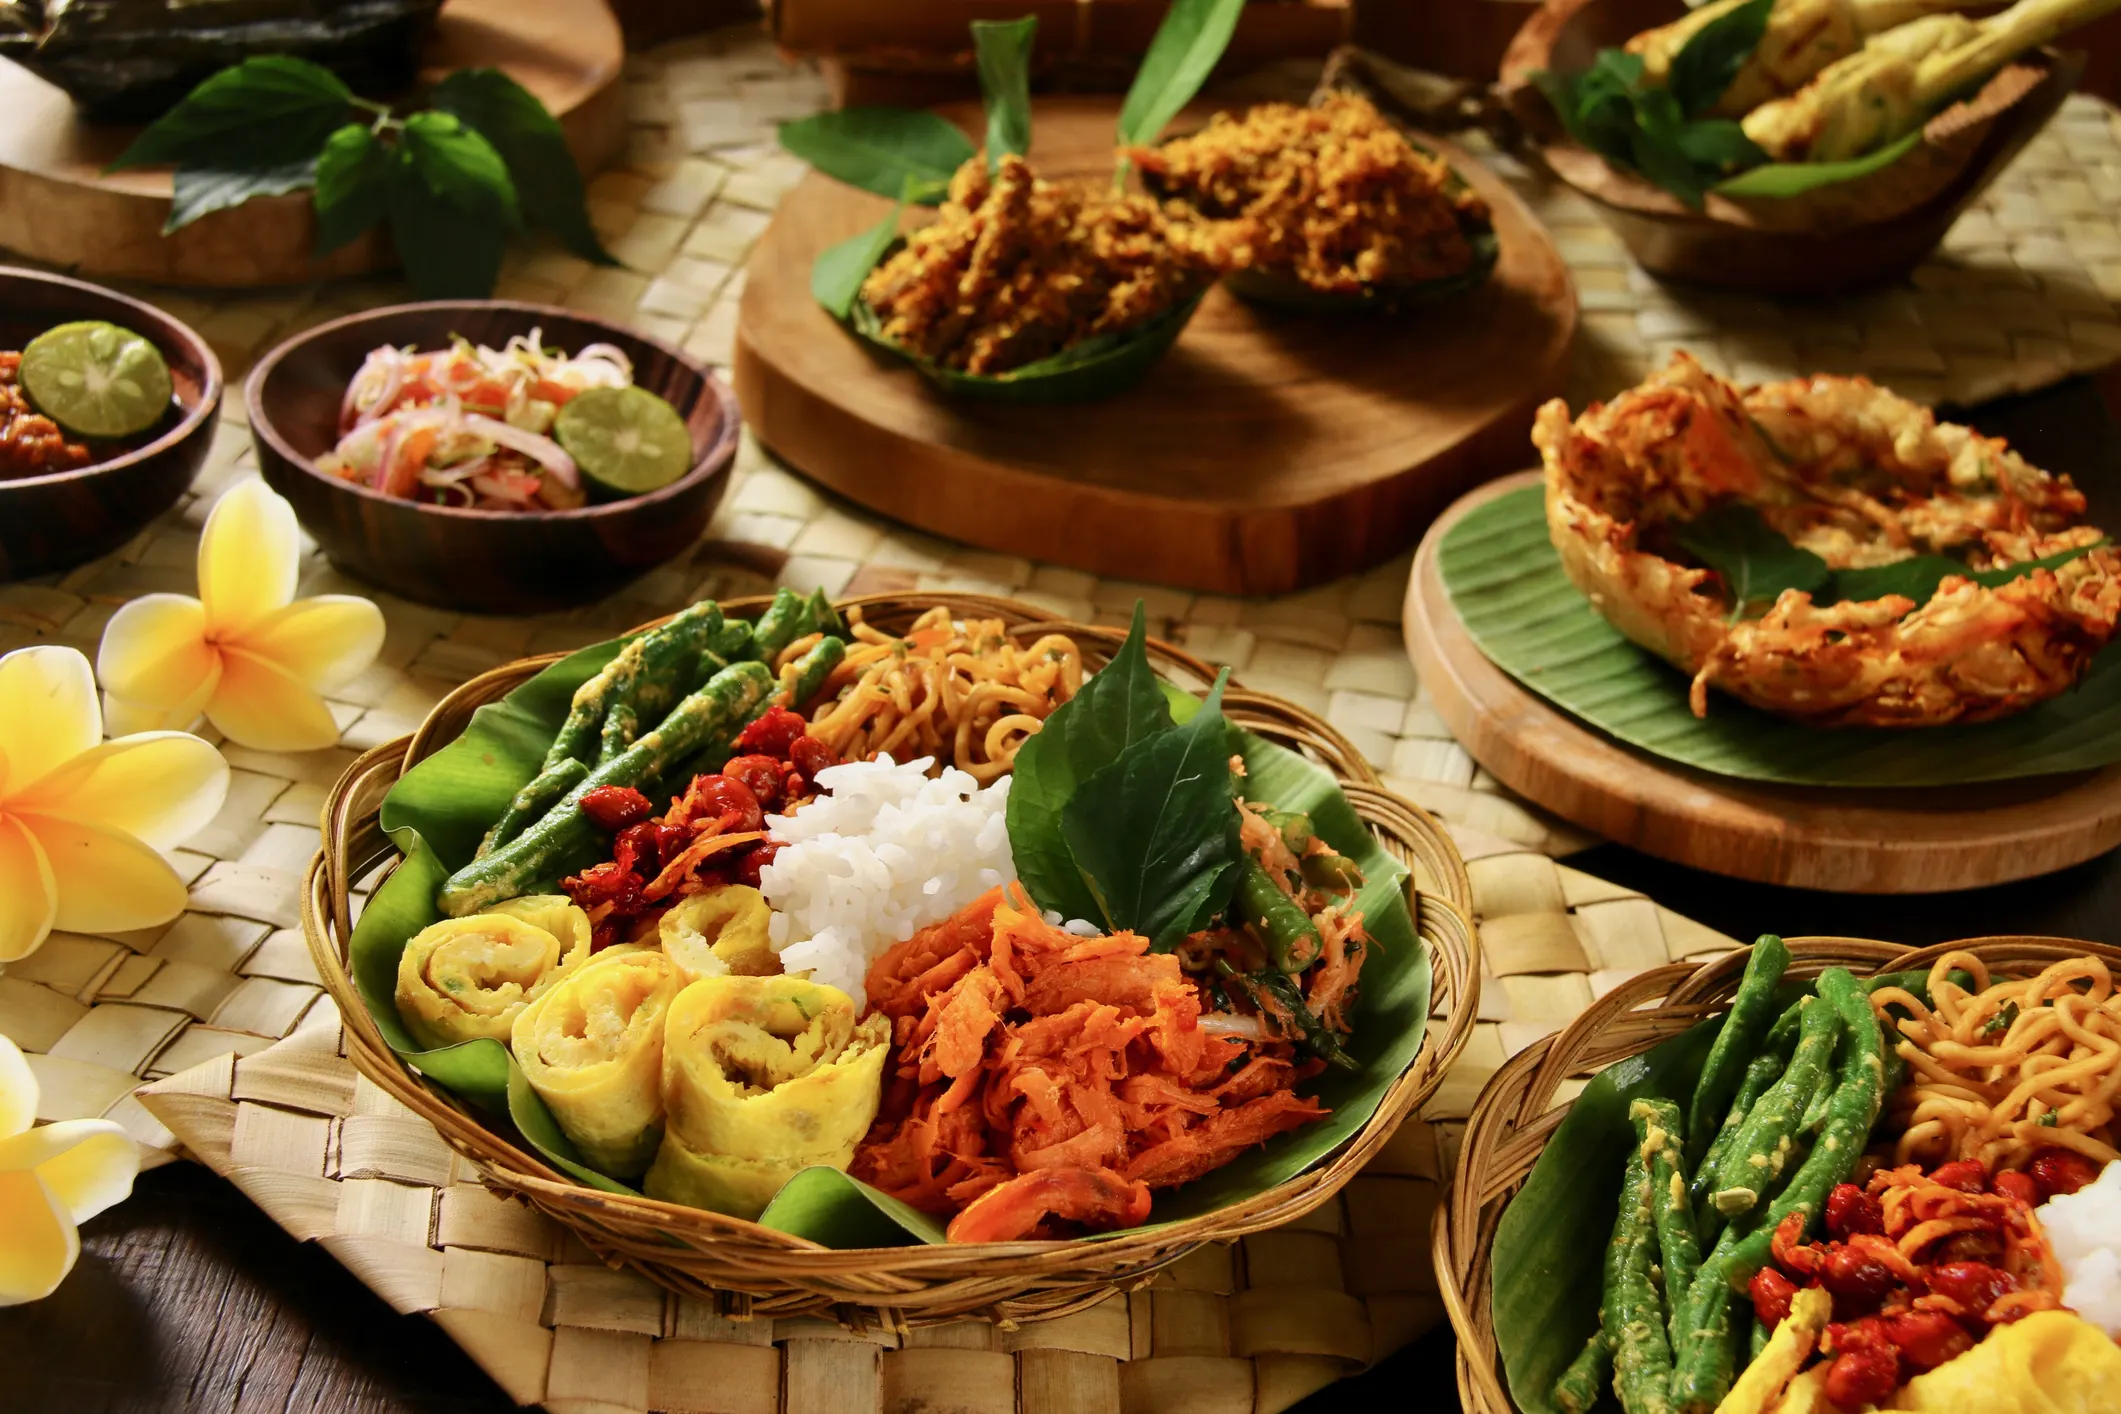 Nasi Campur is a popular Indonesian dish of rice (nasi putih) with a variety of colorful side dishes.